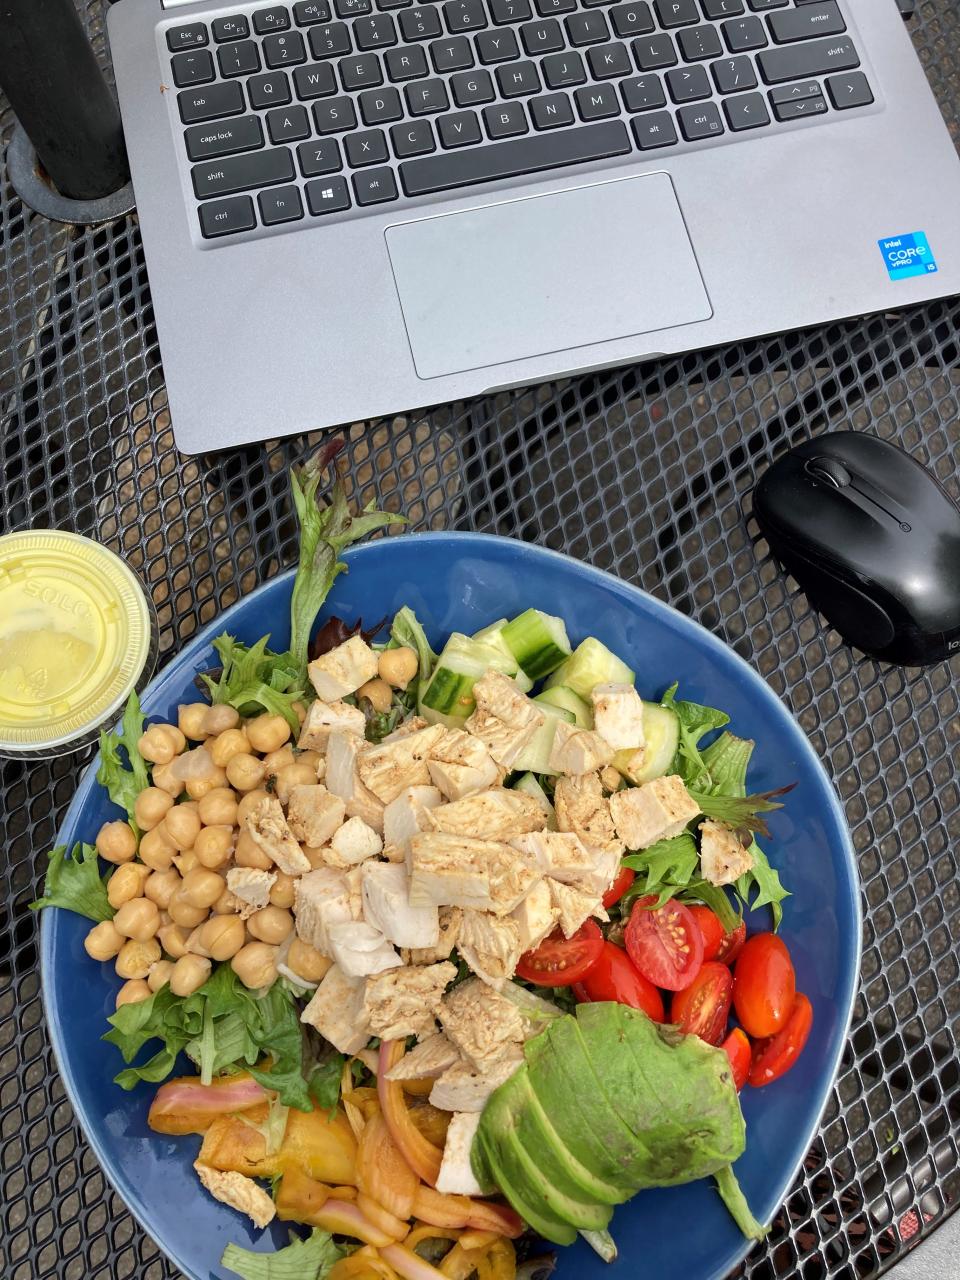 Working lunch at Bobo's House Salad at Bobo's Cafe in Chappaqua. The salad includes chickpeas, cherry tomatoes, tumeric pickled red onions, and cucumber with white balsamic vinaigrette with chicken and avocado additions. Photographed June 7, 2022.